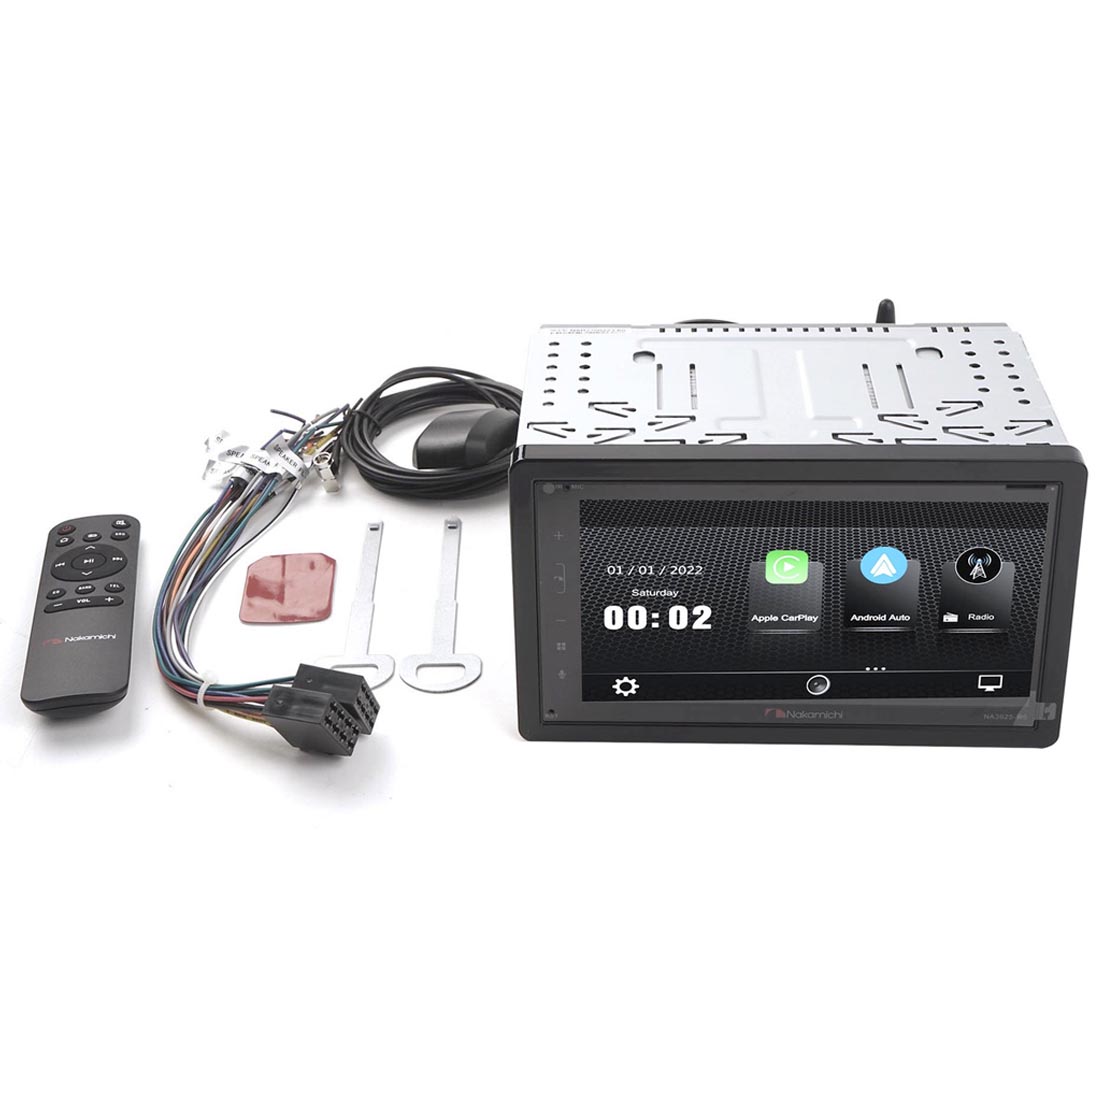 Double-Din 6.8″ Mechless, Wireless Receiver